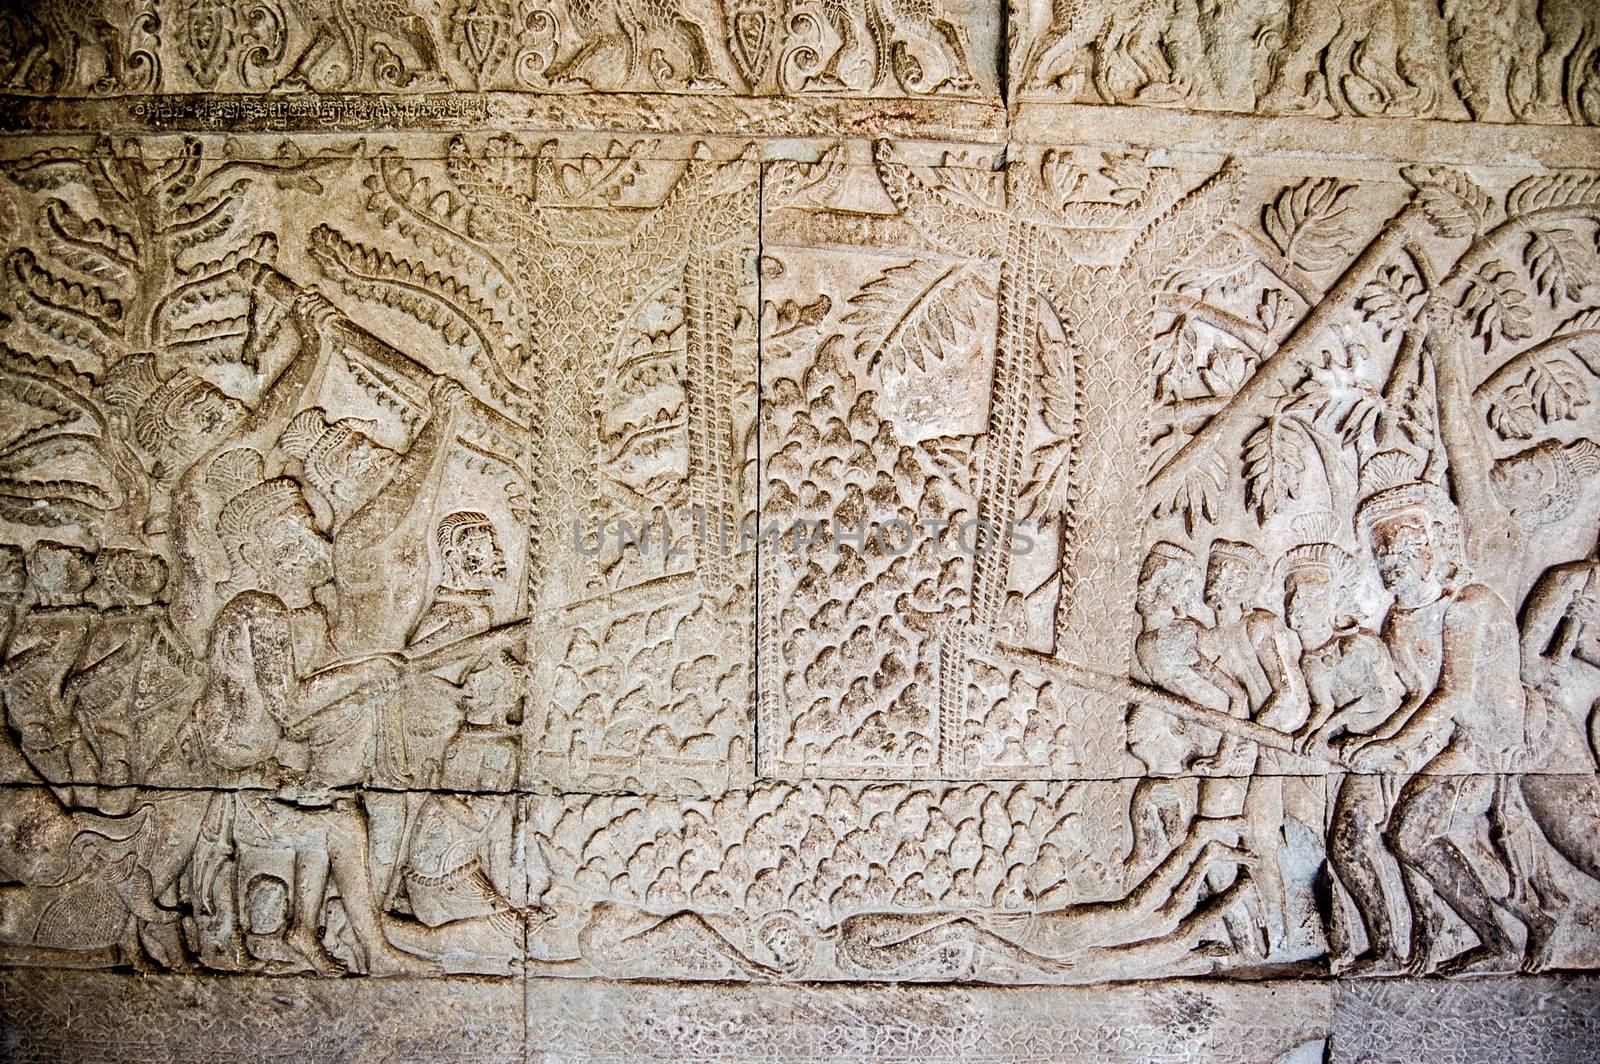 Bas relief carving showing one of the 32 hells of Hindu religion. Rice thieves are punished by demons sticking red hot irons thrust through their abdomens. Angkor Wat temple, Siem Reap, Cambodia.